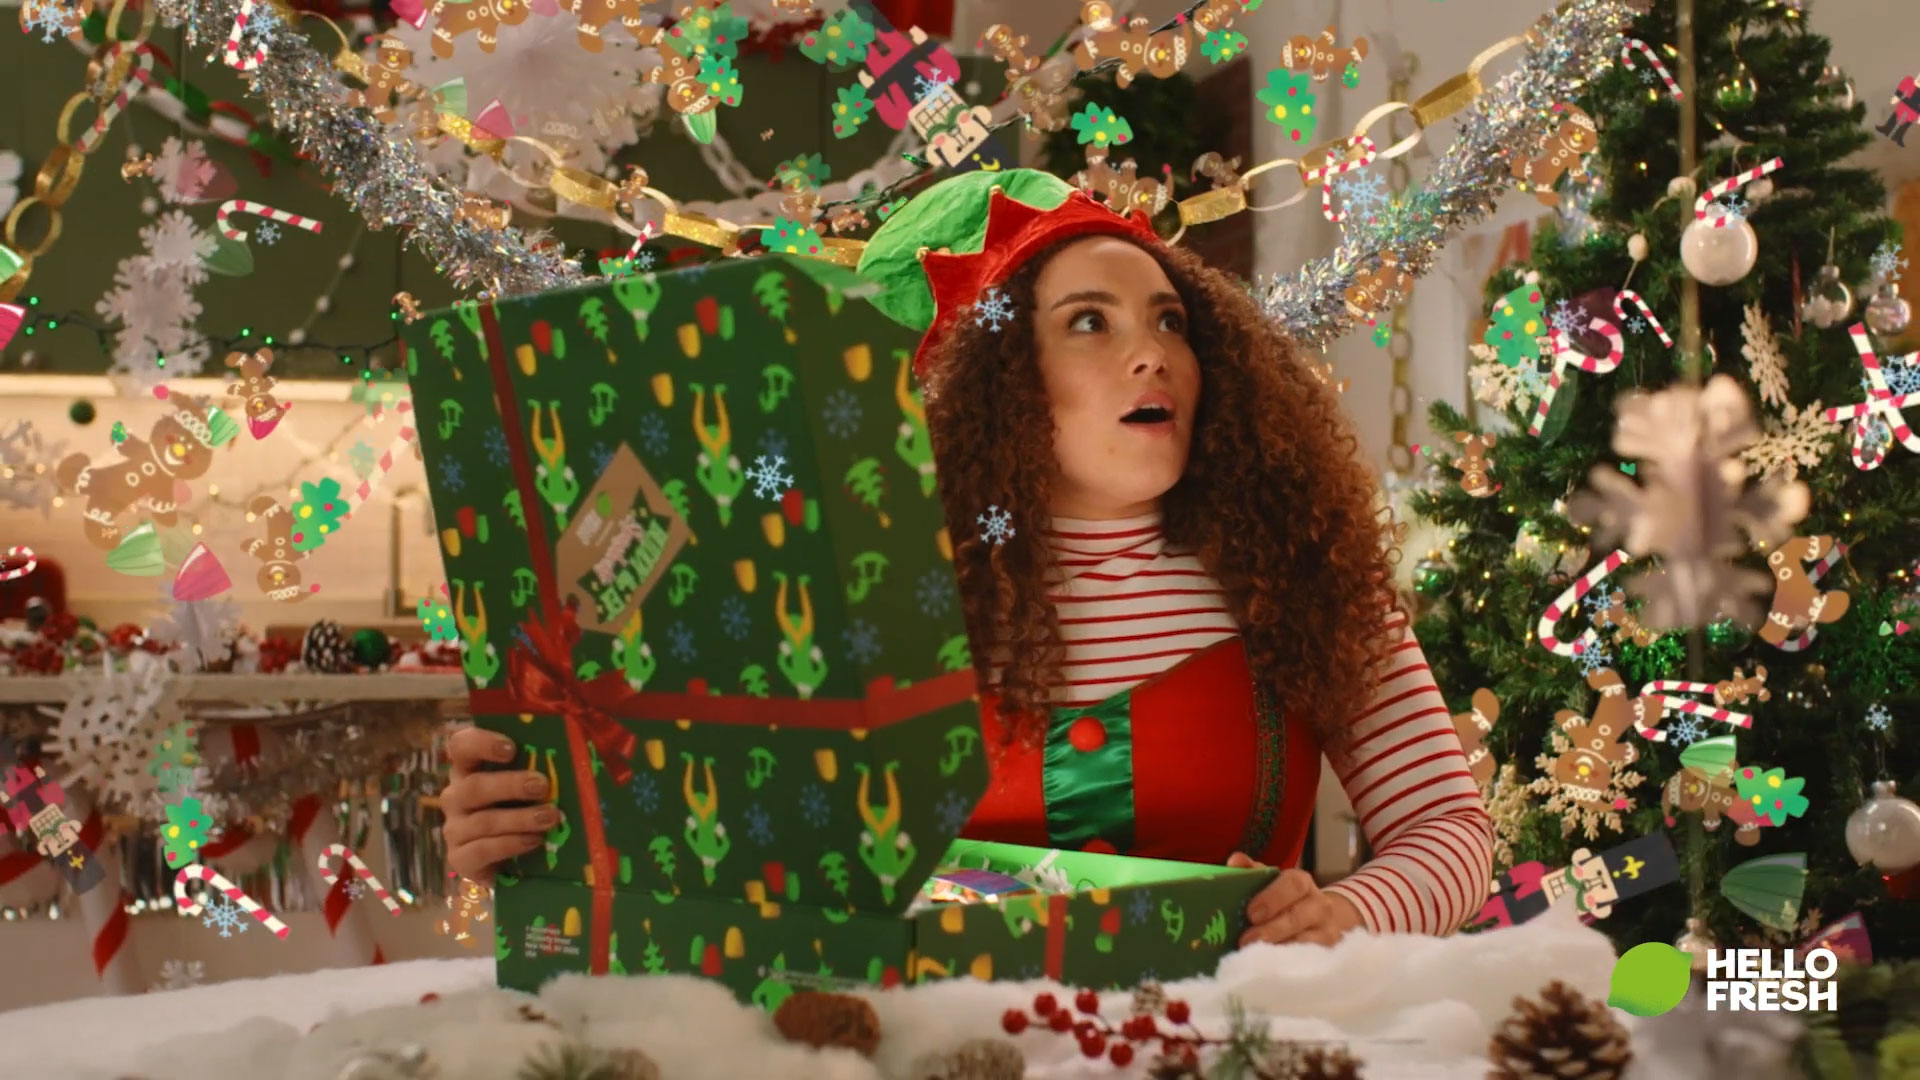 This holiday season, HelloFresh has brought to life the famous spaghetti dish from the beloved holiday film, Elf.